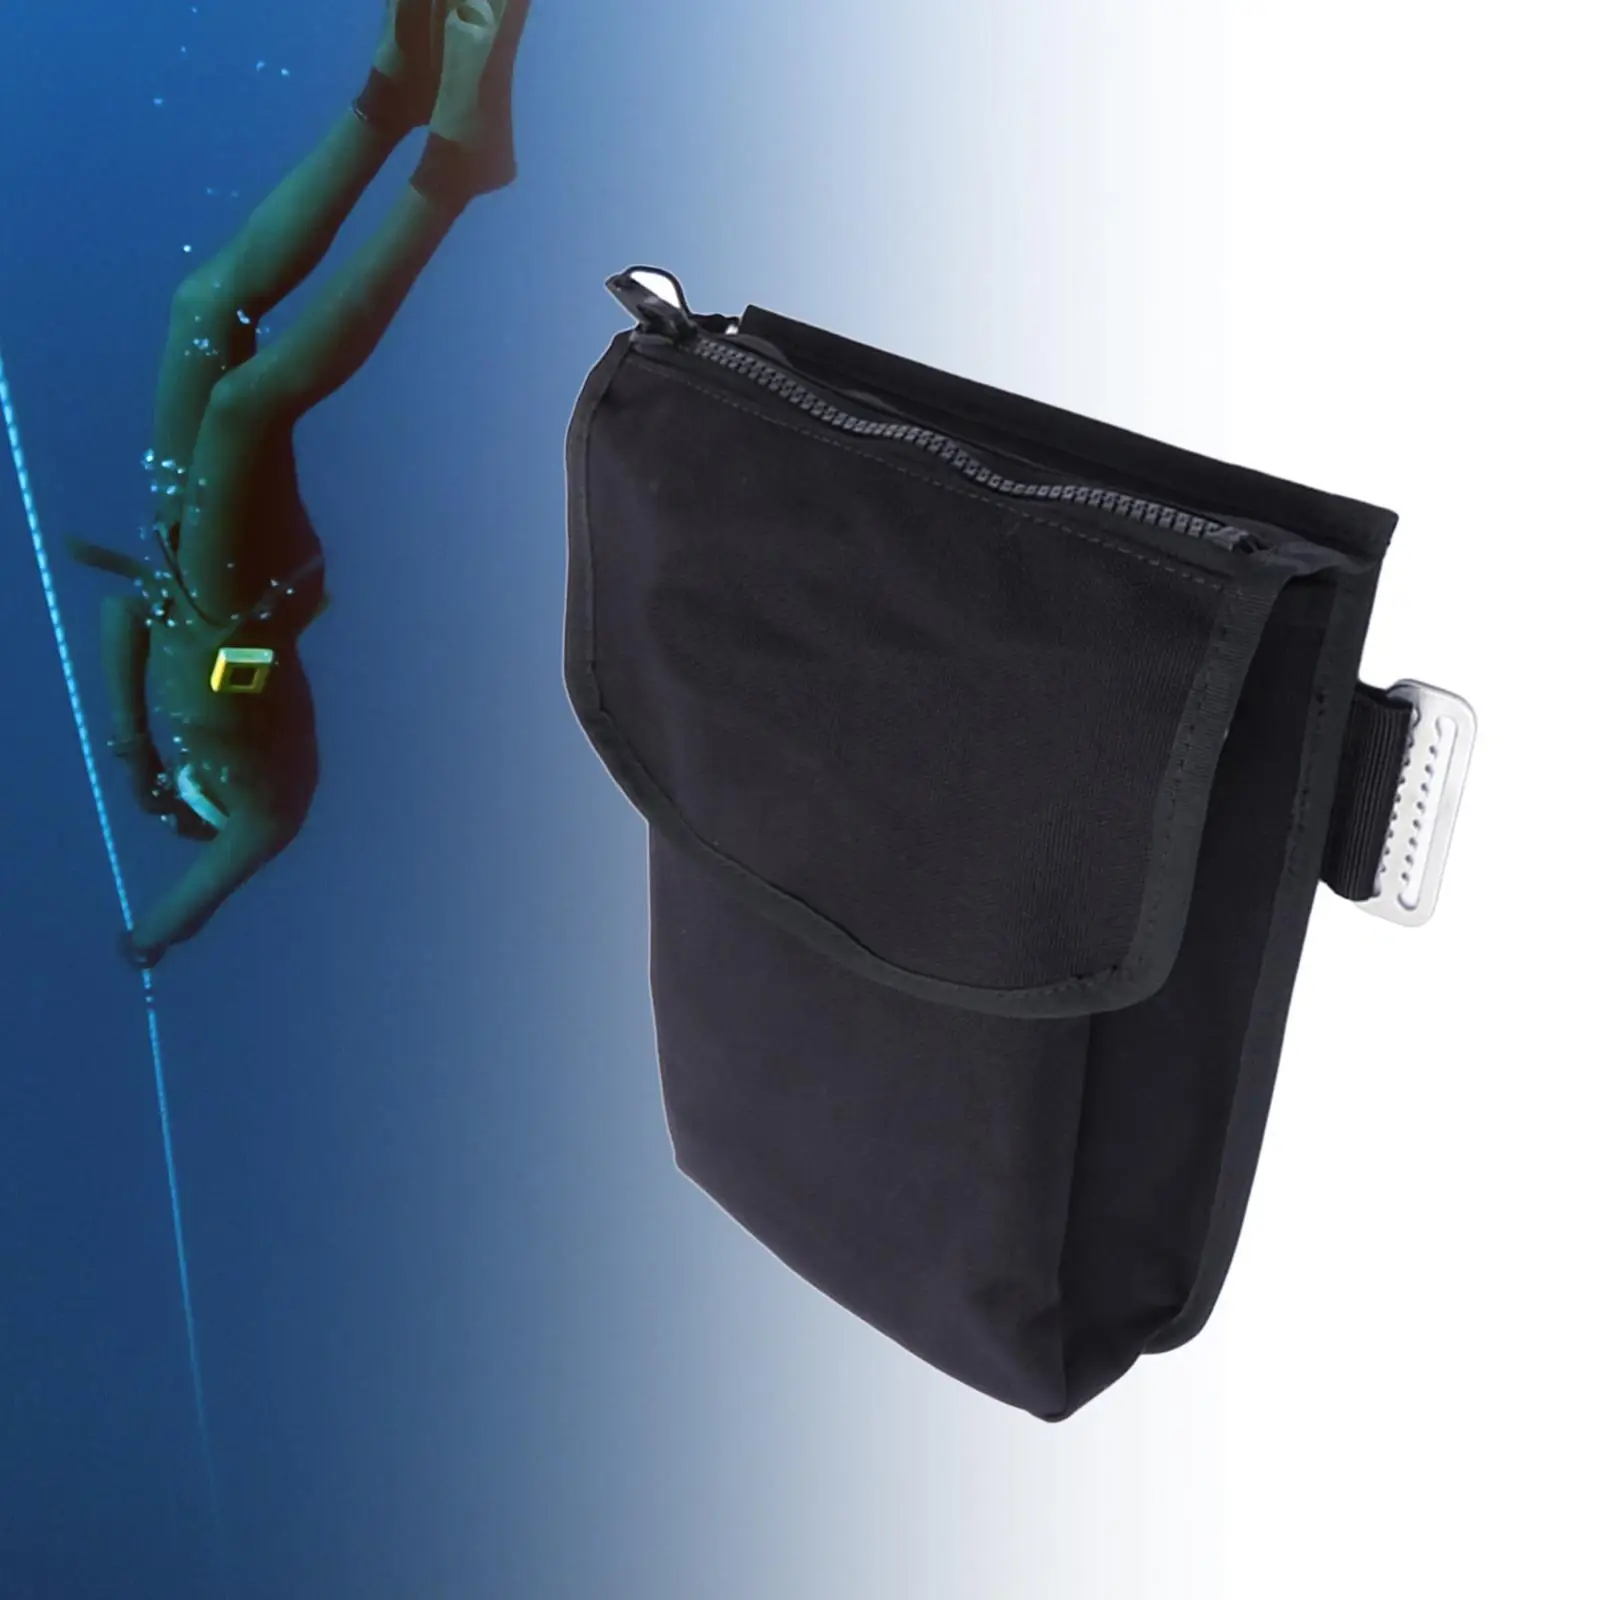 Scuba Diving Thigh Pocket Snorkeling Equipment Holder Scuba Diving Accessories for Underwater Diver Snorkeling Swimming Black